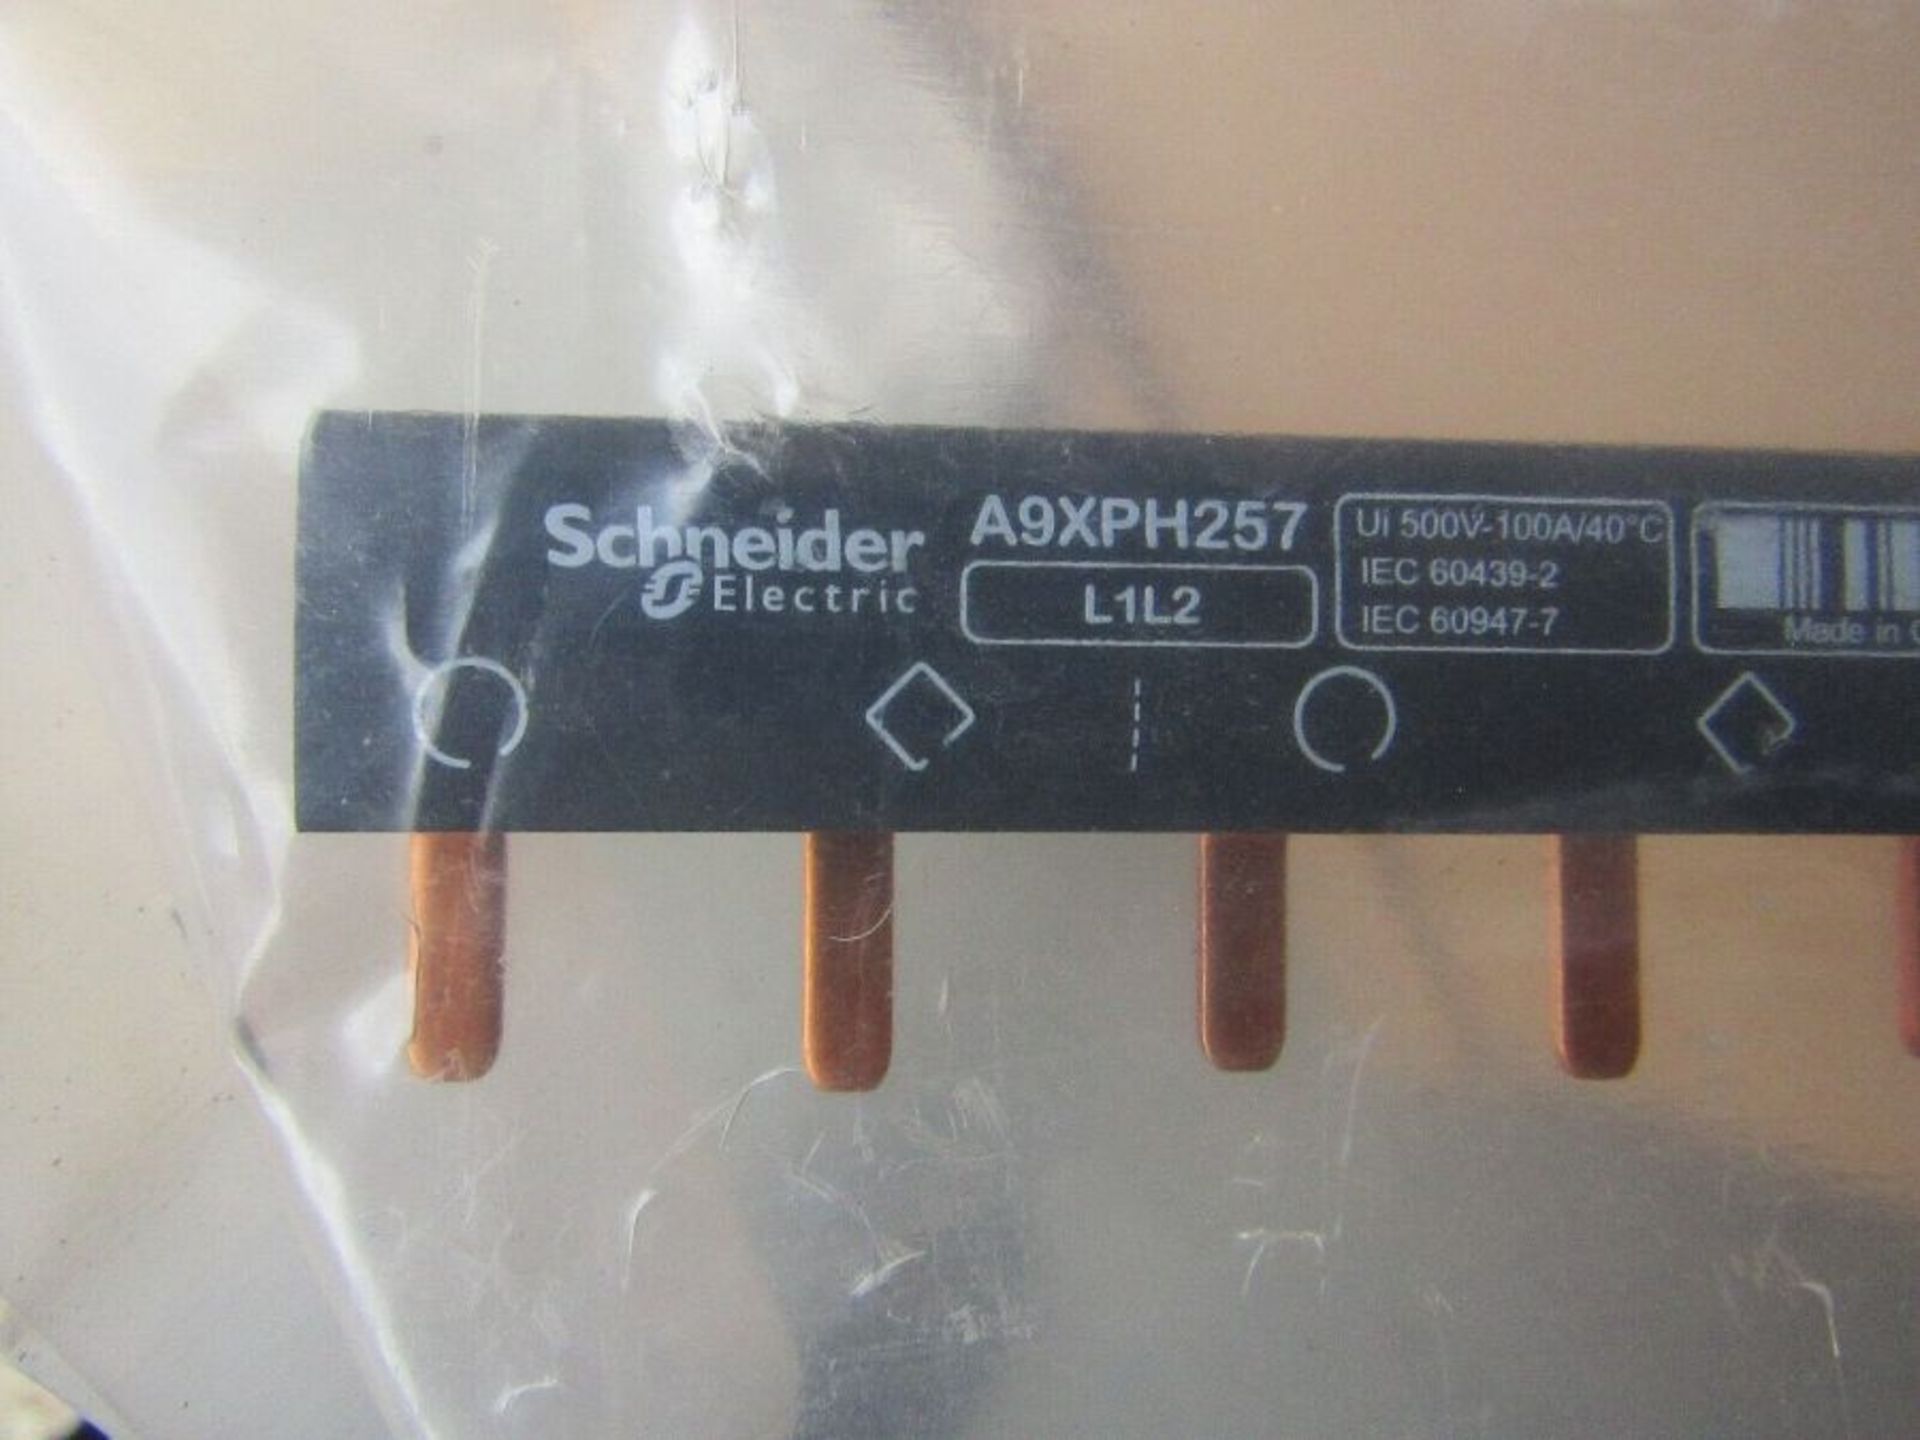 Schneider Electric Acti 9 1 Phase Busbar, 415V ac, 18mm Pitch Table 7762733 - Image 2 of 2